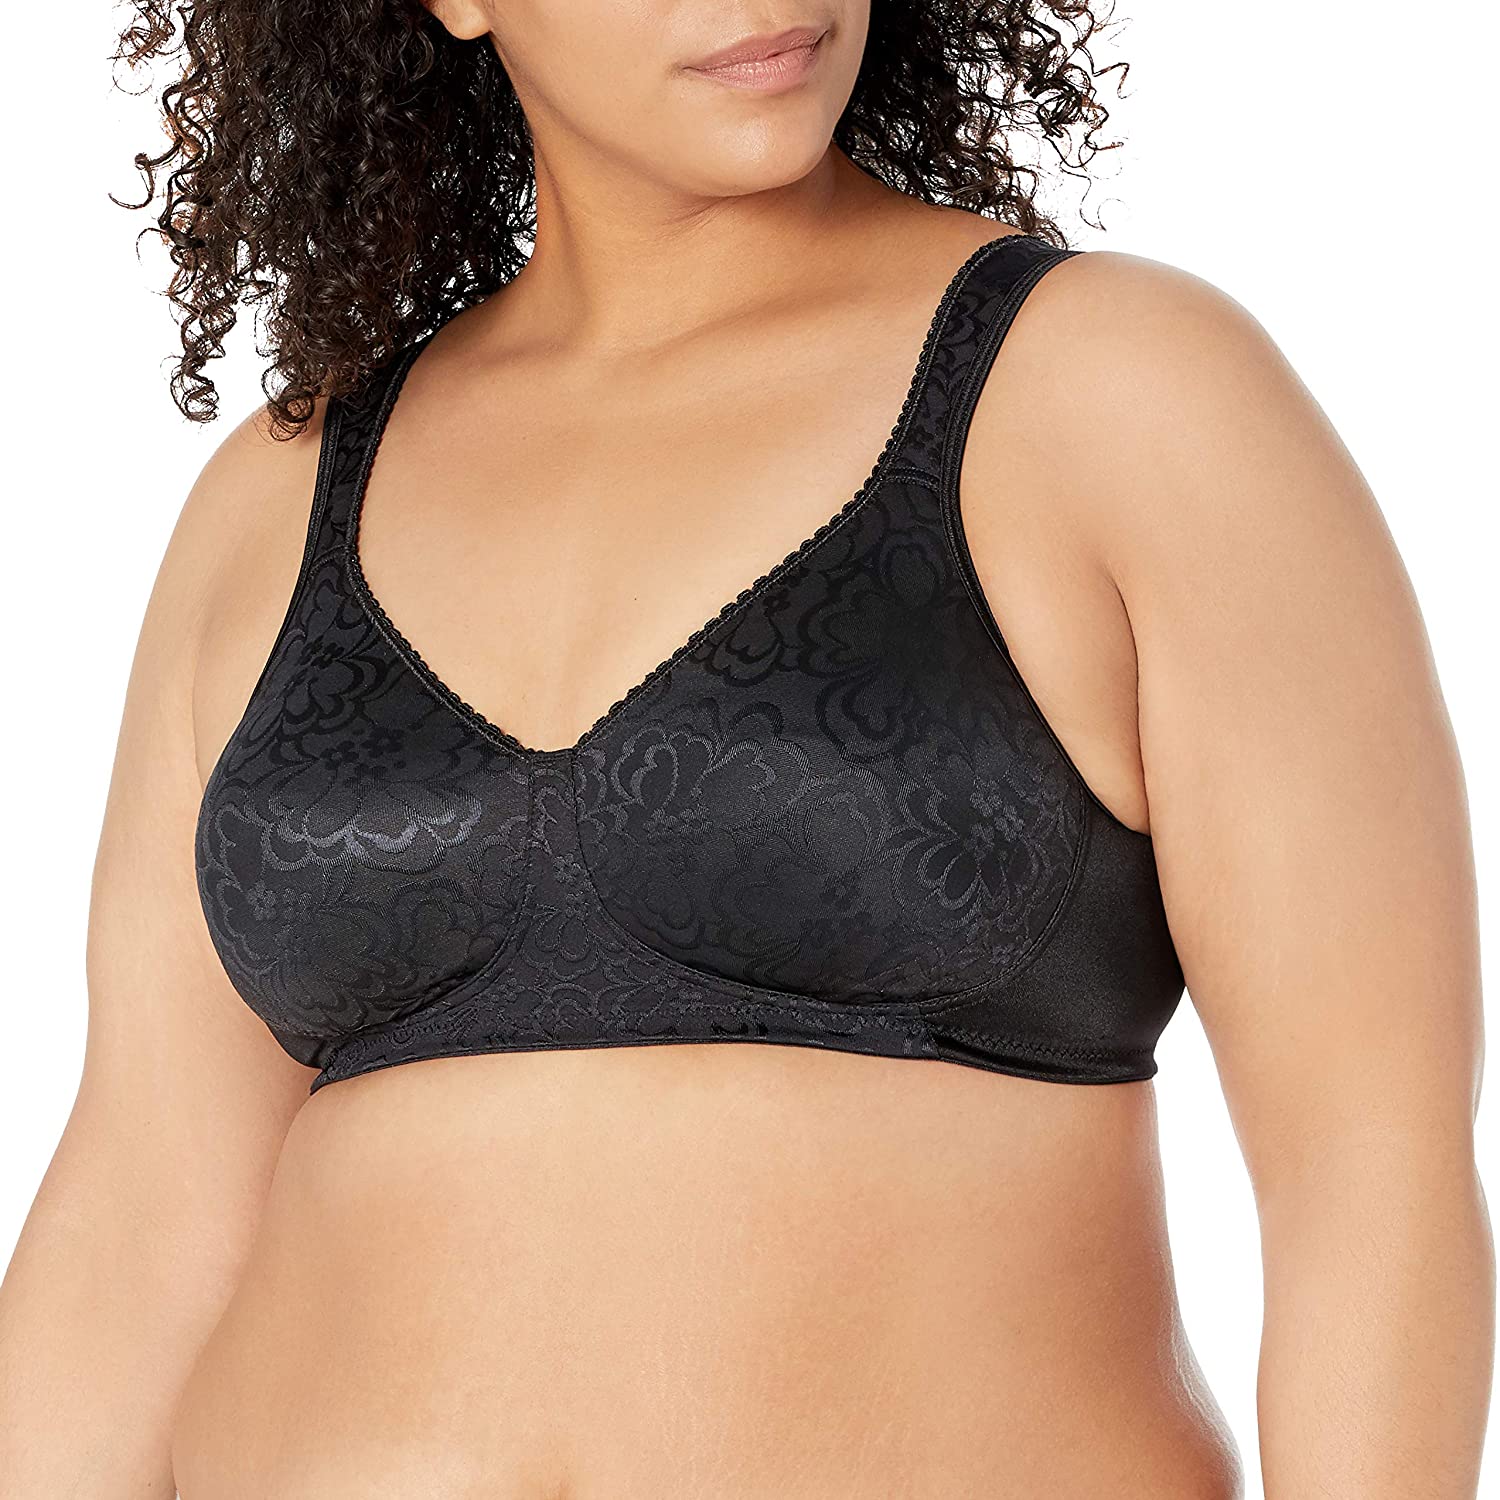 Available in Single and 2-Packs Playtex Women's 18 Hour Ultimate Lift and Support Wire Free Bra US4745 